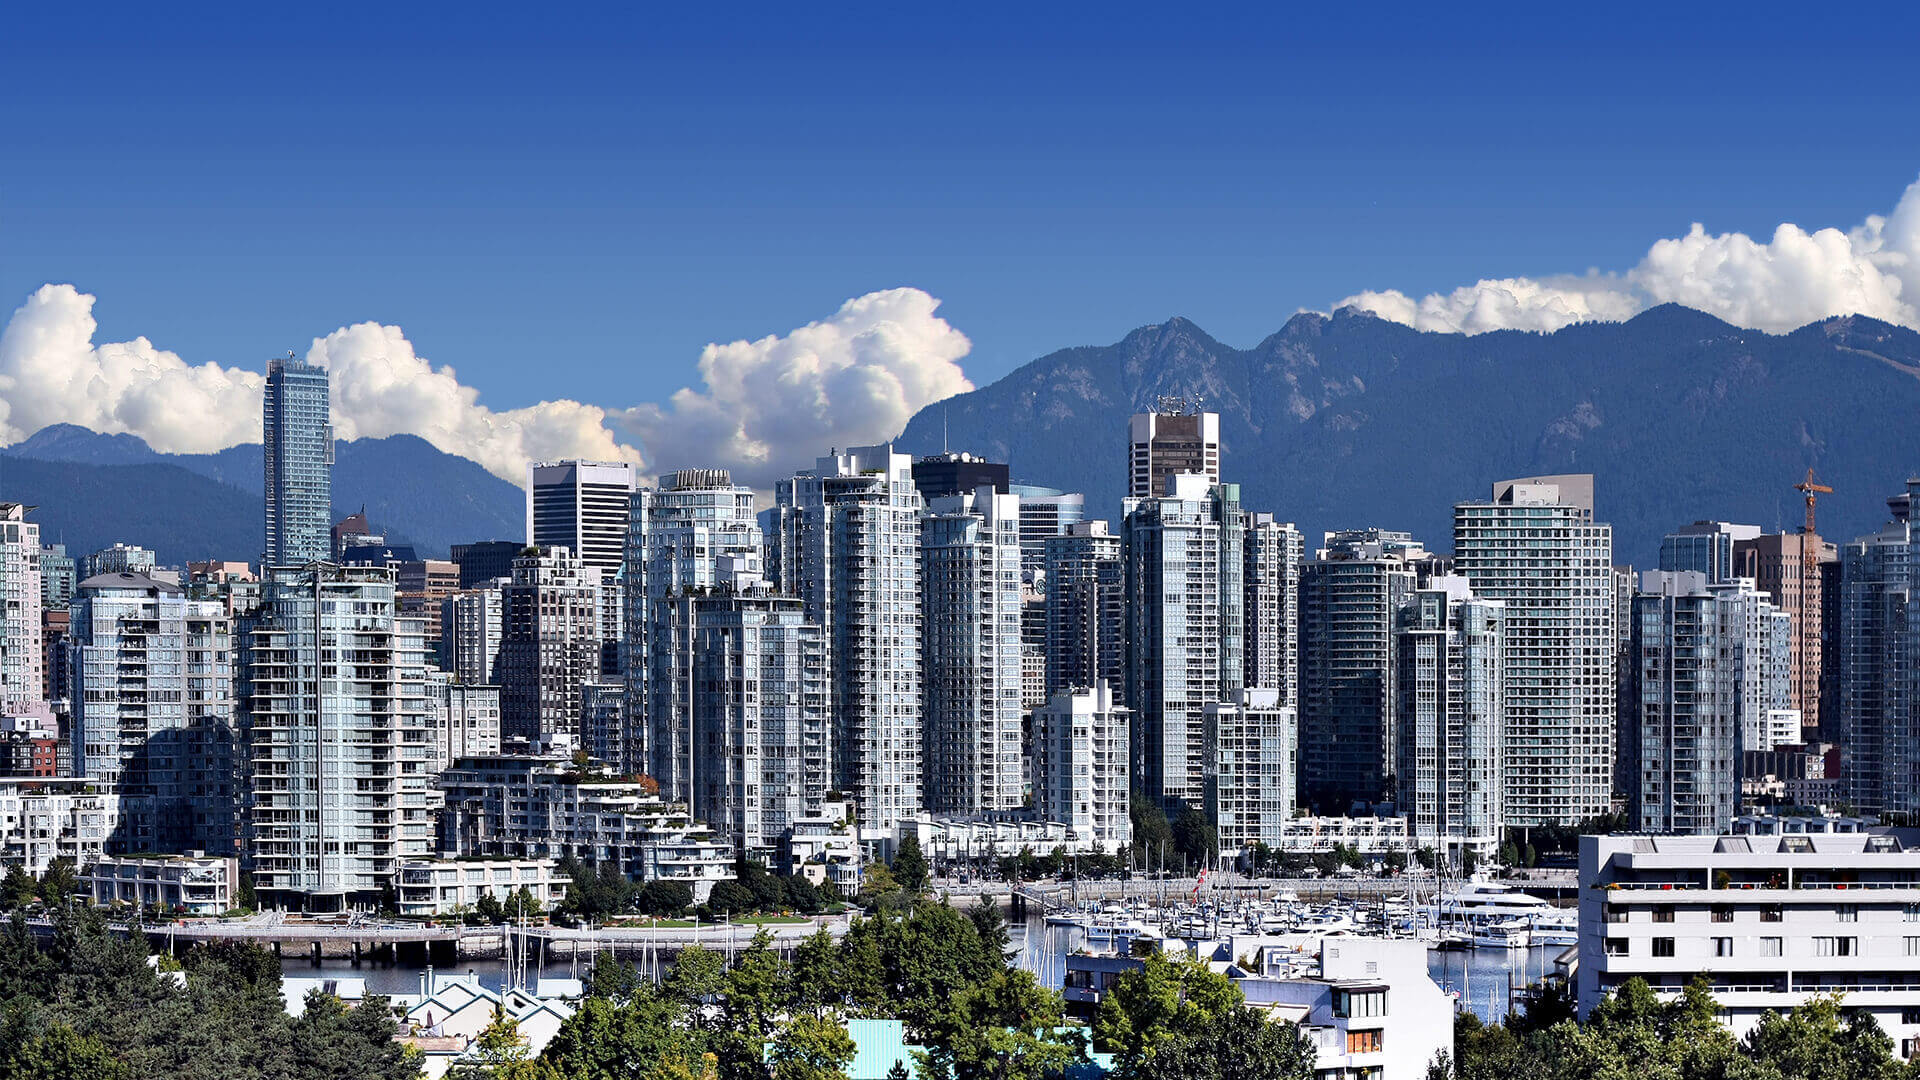 A panoramic view of Vancouver's dense urban skyline with residential and commercial high-rises against a backdrop of the majestic North Shore Mountains and scattered cumulus clouds.